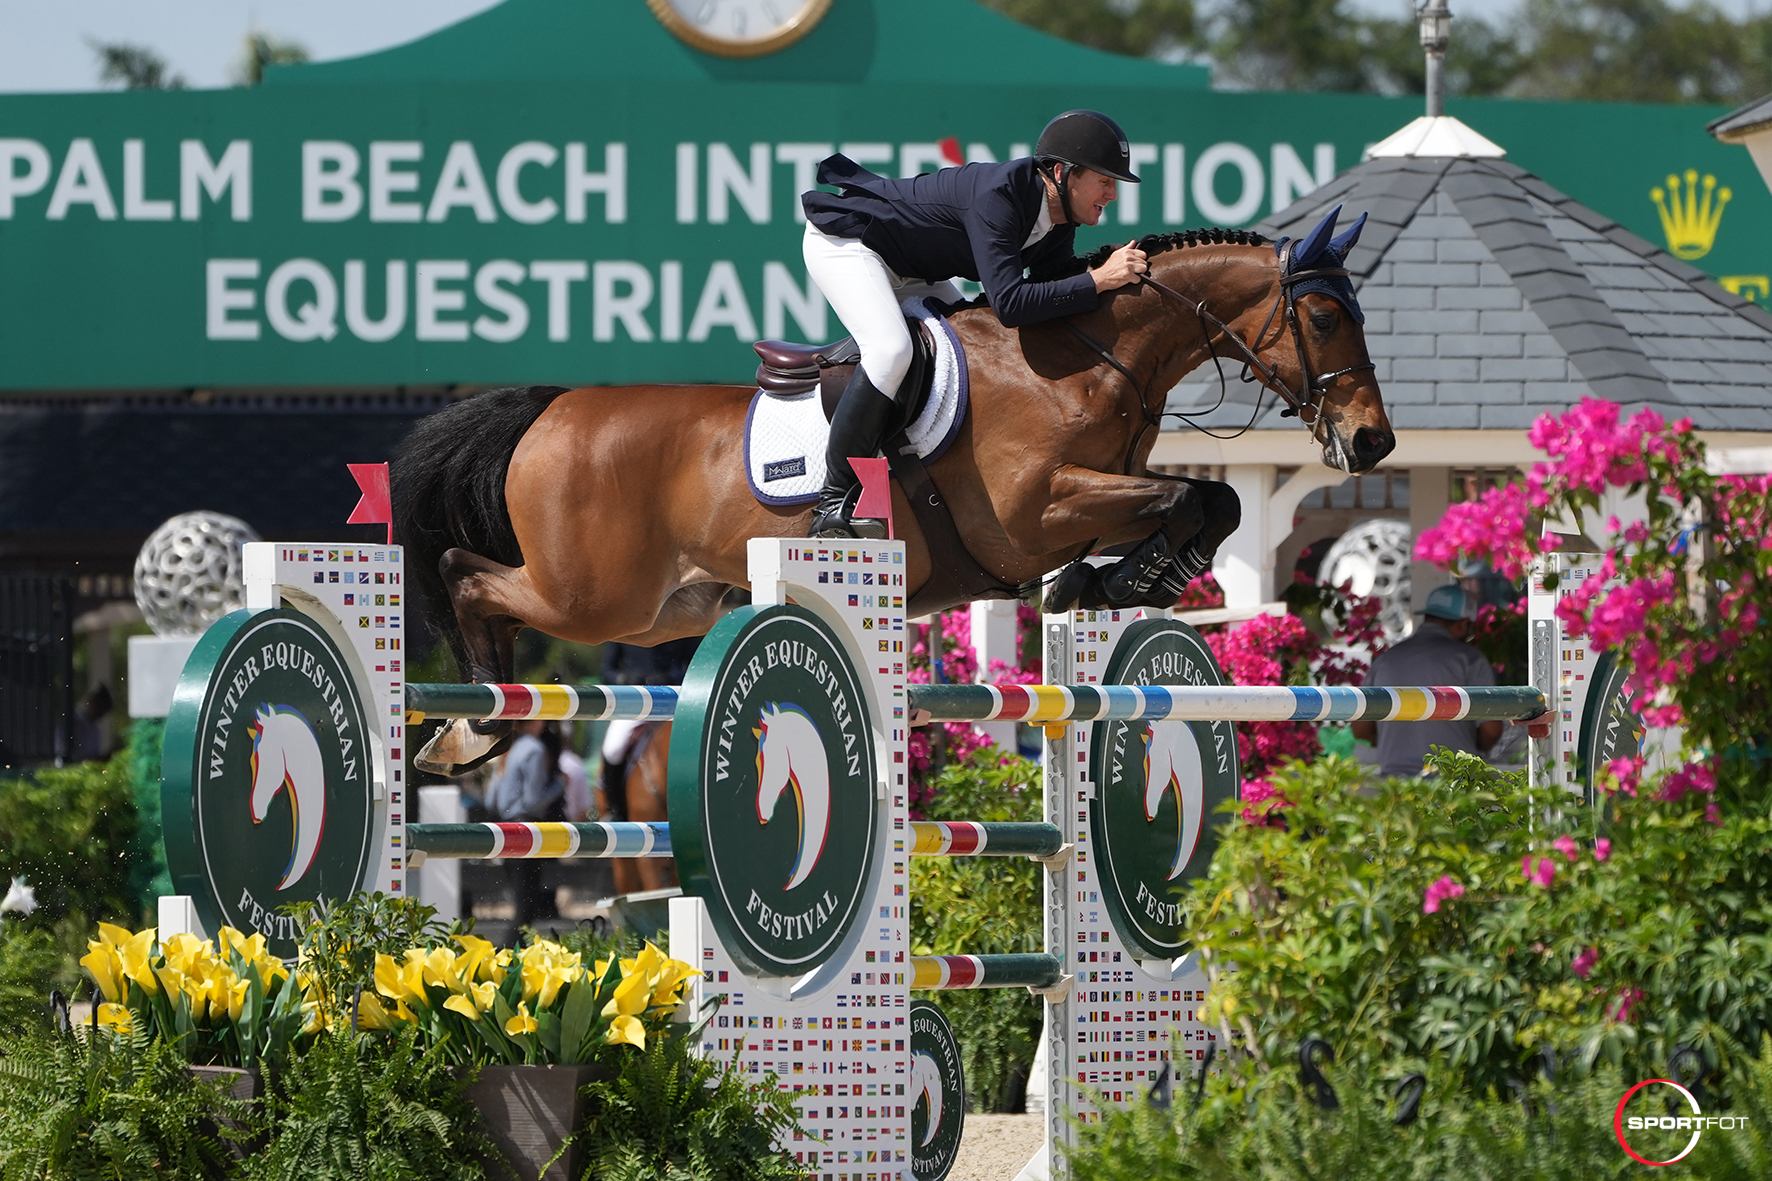 McLain Ward wins another one in Wellington. "We only ride Catoki, just before we have to enter the ring. And it seems to work fine..."